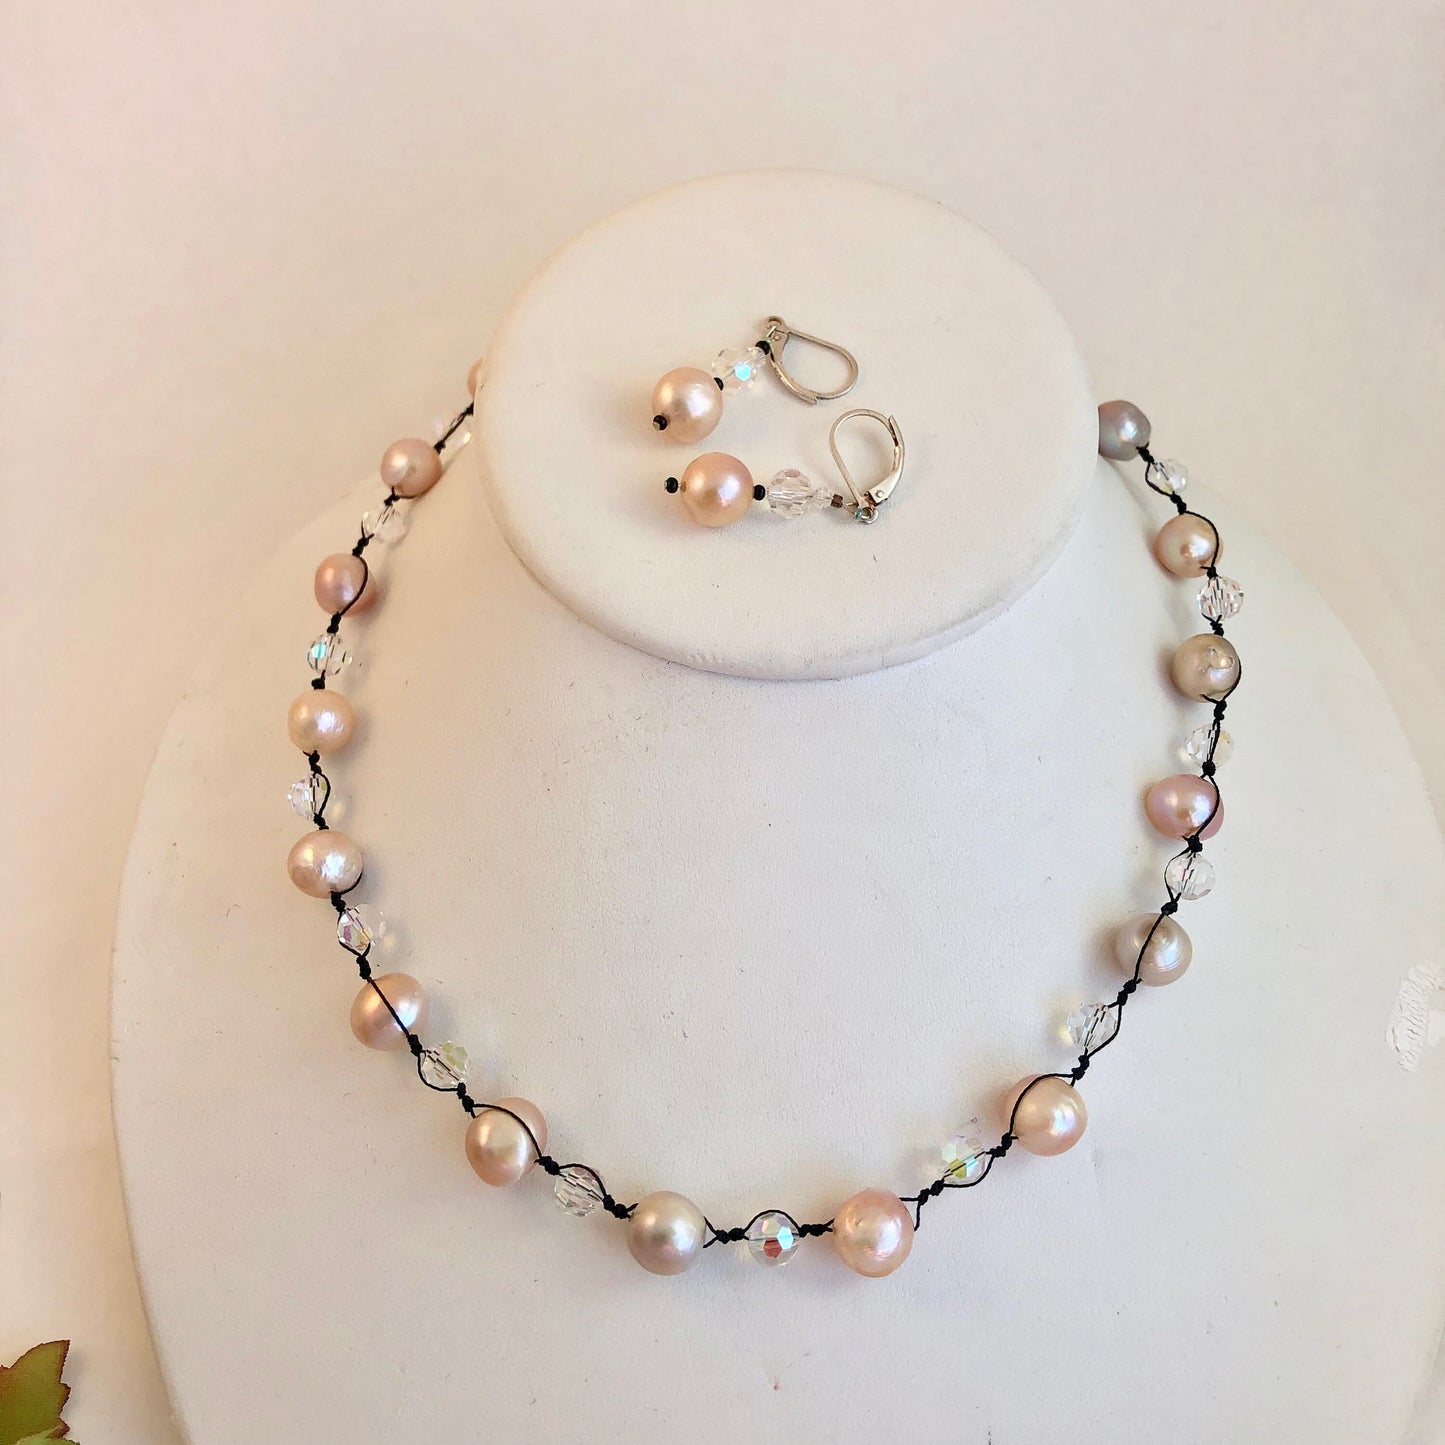 Pearls. Beautiful knotted pale pink fresh water pearl necklace. The necklace is knotted with black silk thread and accented with crystal beads.